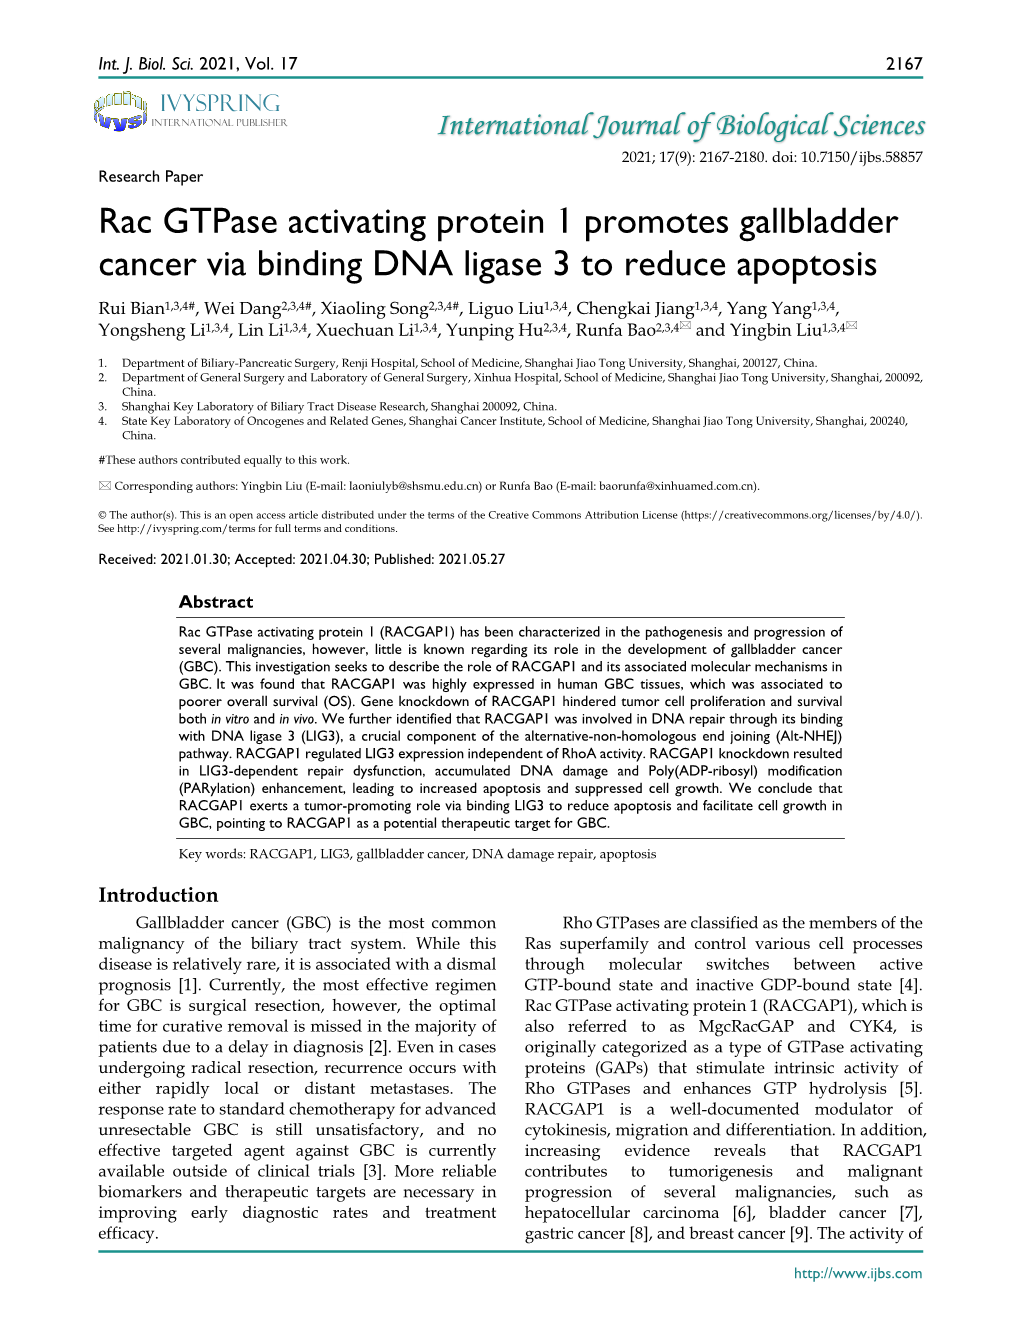 Rac Gtpase Activating Protein 1 Promotes Gallbladder Cancer Via